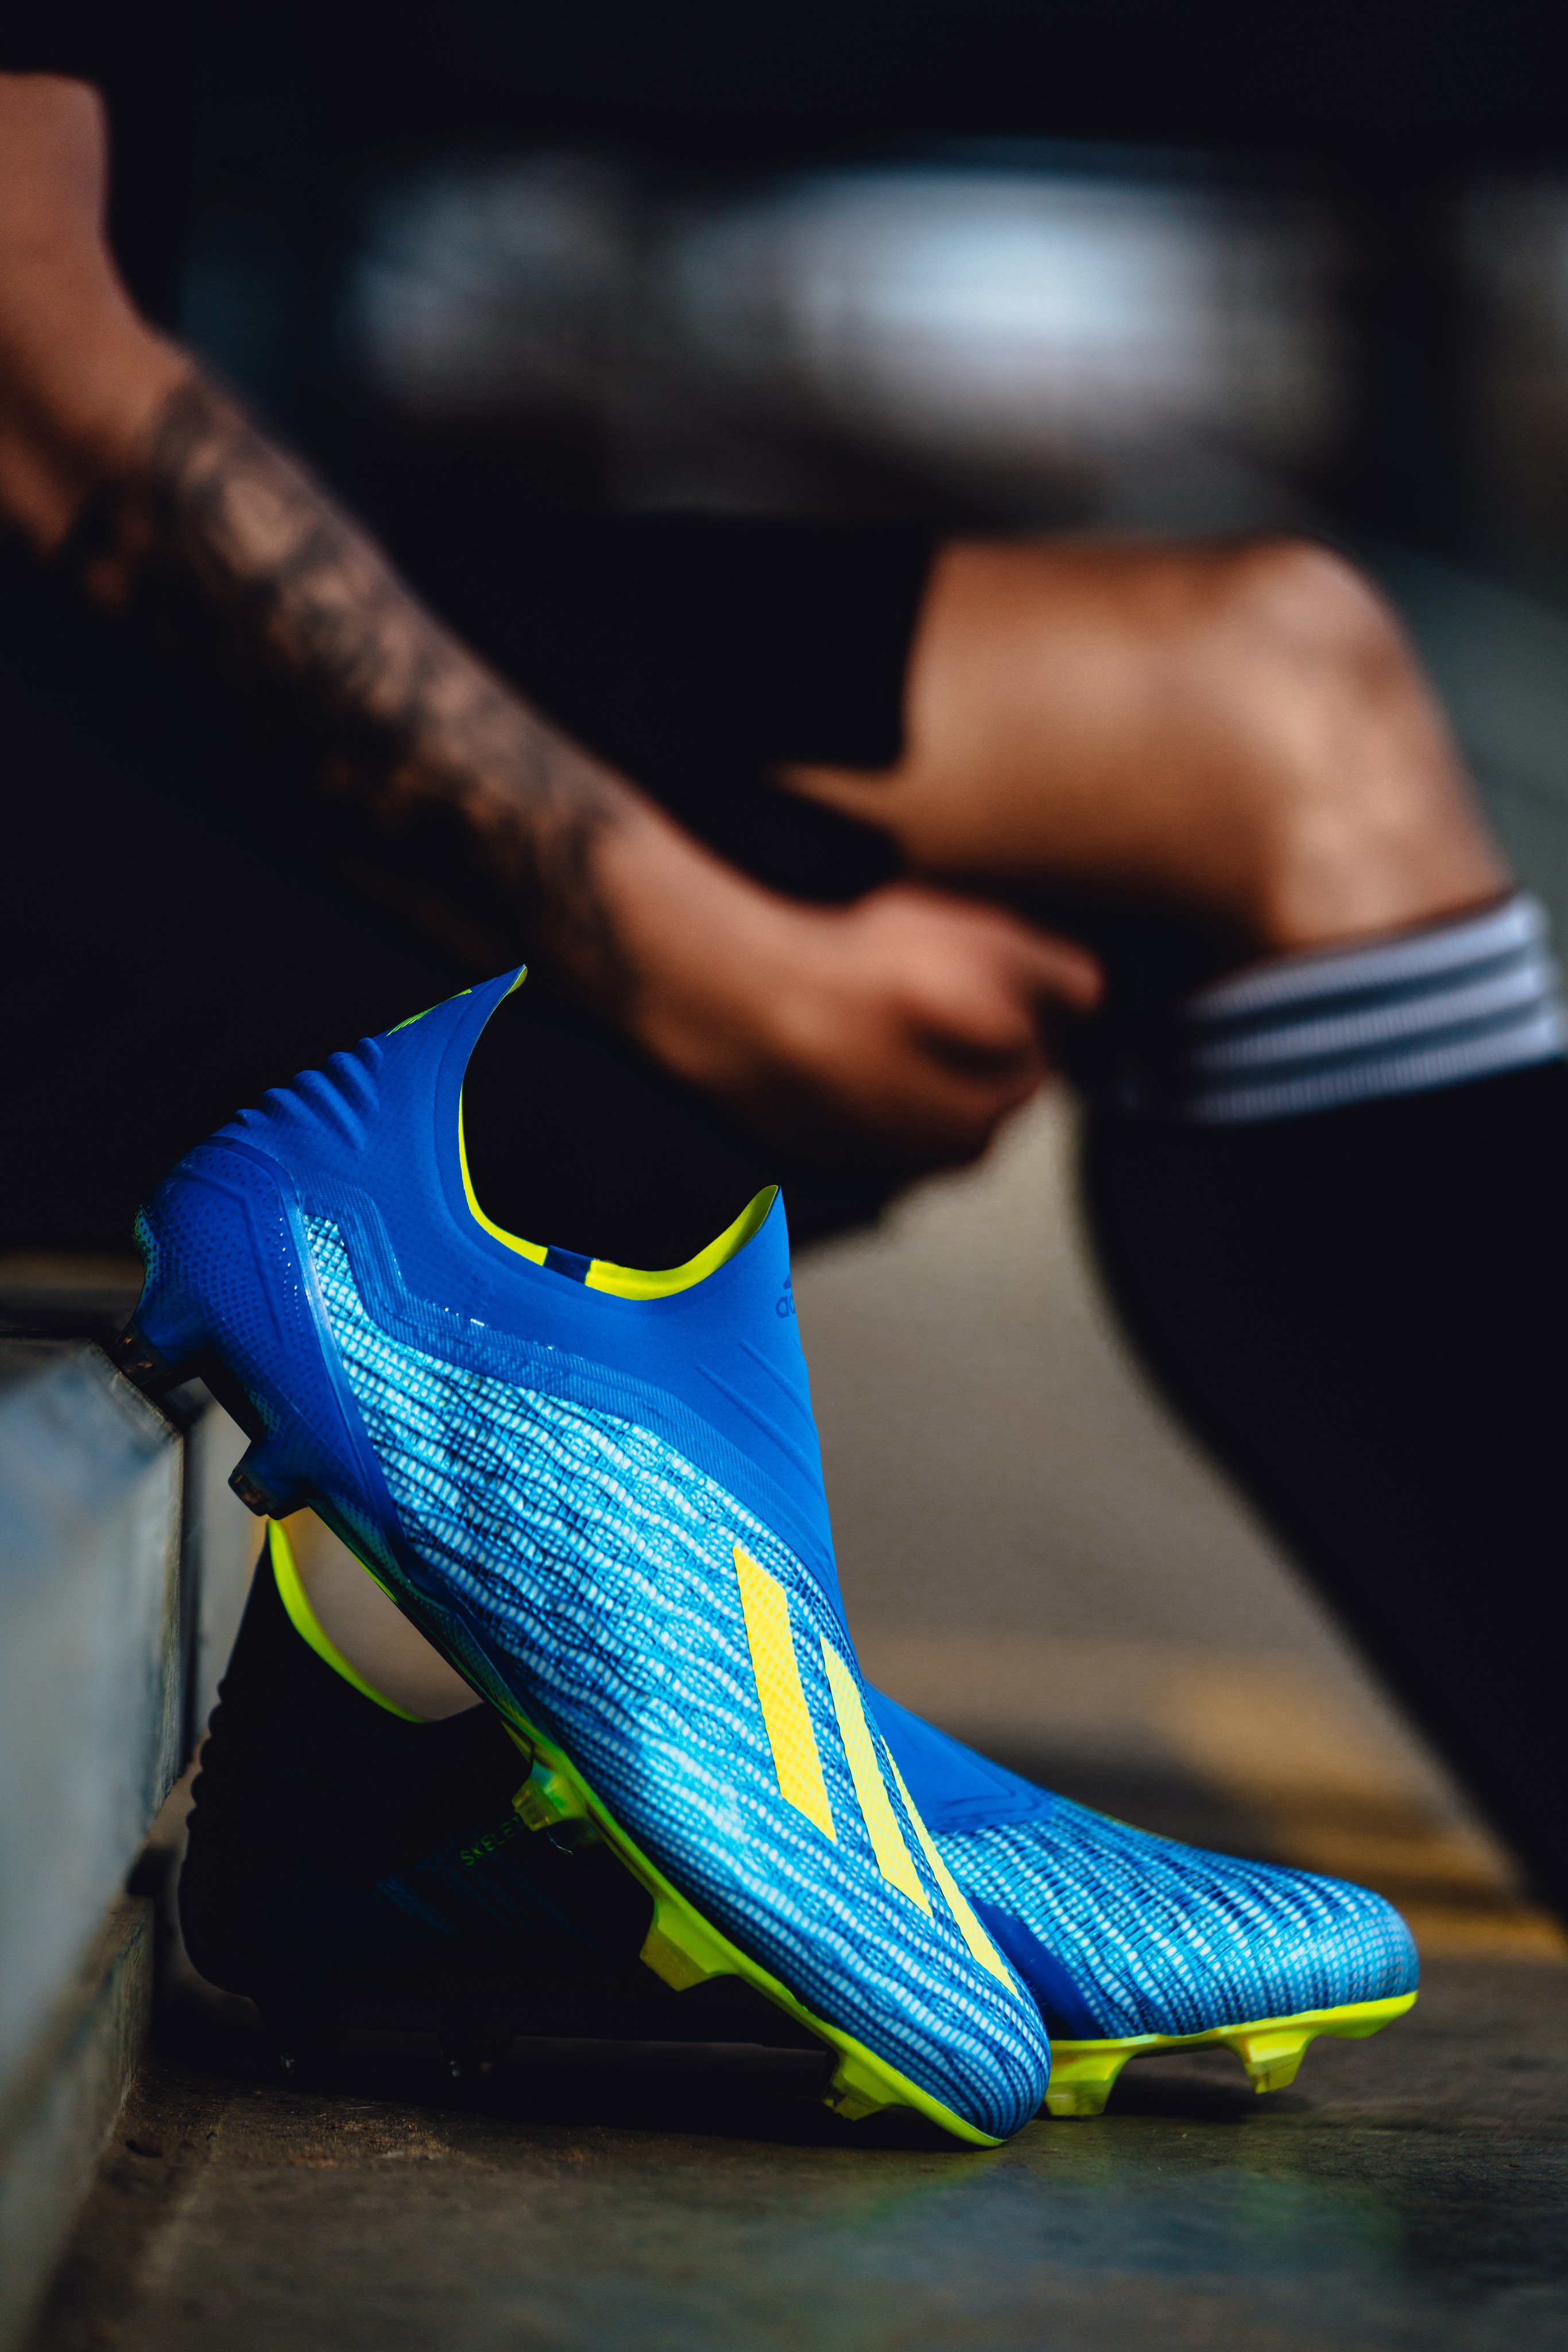 Ineficiente Centralizar Finanzas adidas Football on Twitter: "Unleash speed. Introducing the all-new Energy  Mode #X18+, exclusively available through adidas and selected retail  partners. 👉https://t.co/1ov2Ks3UJY 👈 #HereToCreate  https://t.co/qhzMO7cX6X" / Twitter